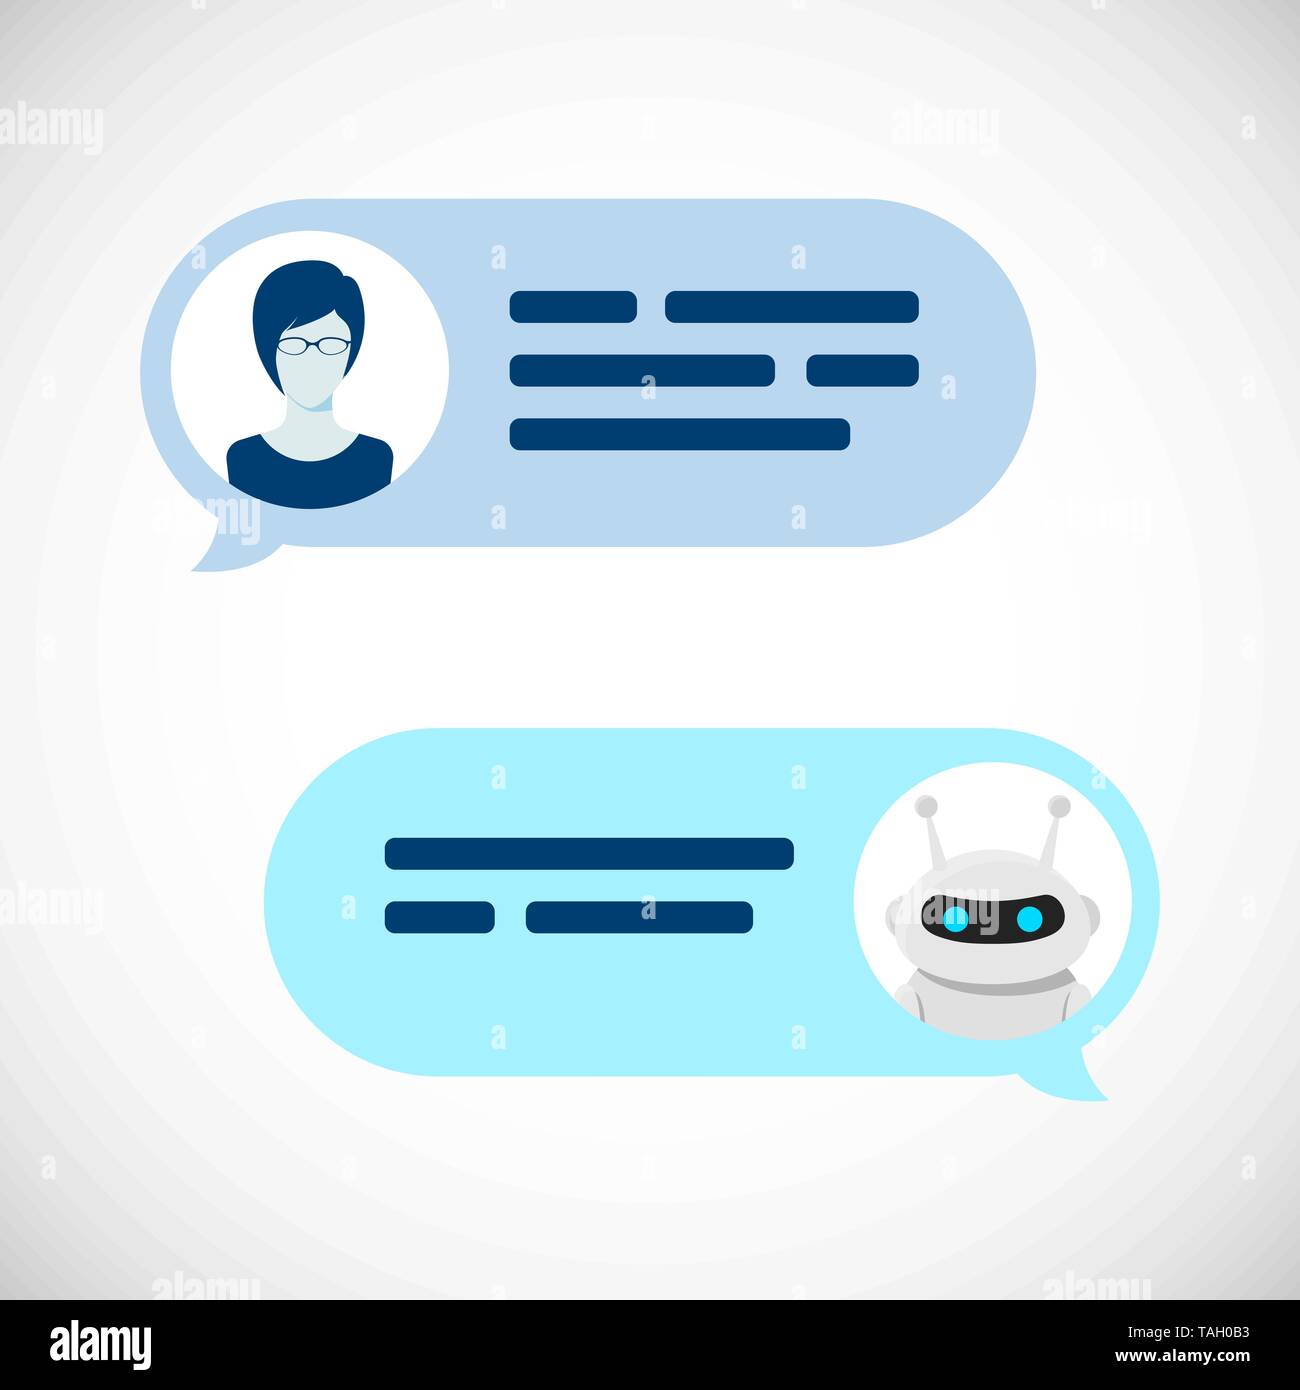 Chatbot robot concept. Dialog help service. User and bot speech messages. Vector illustration Stock Vector